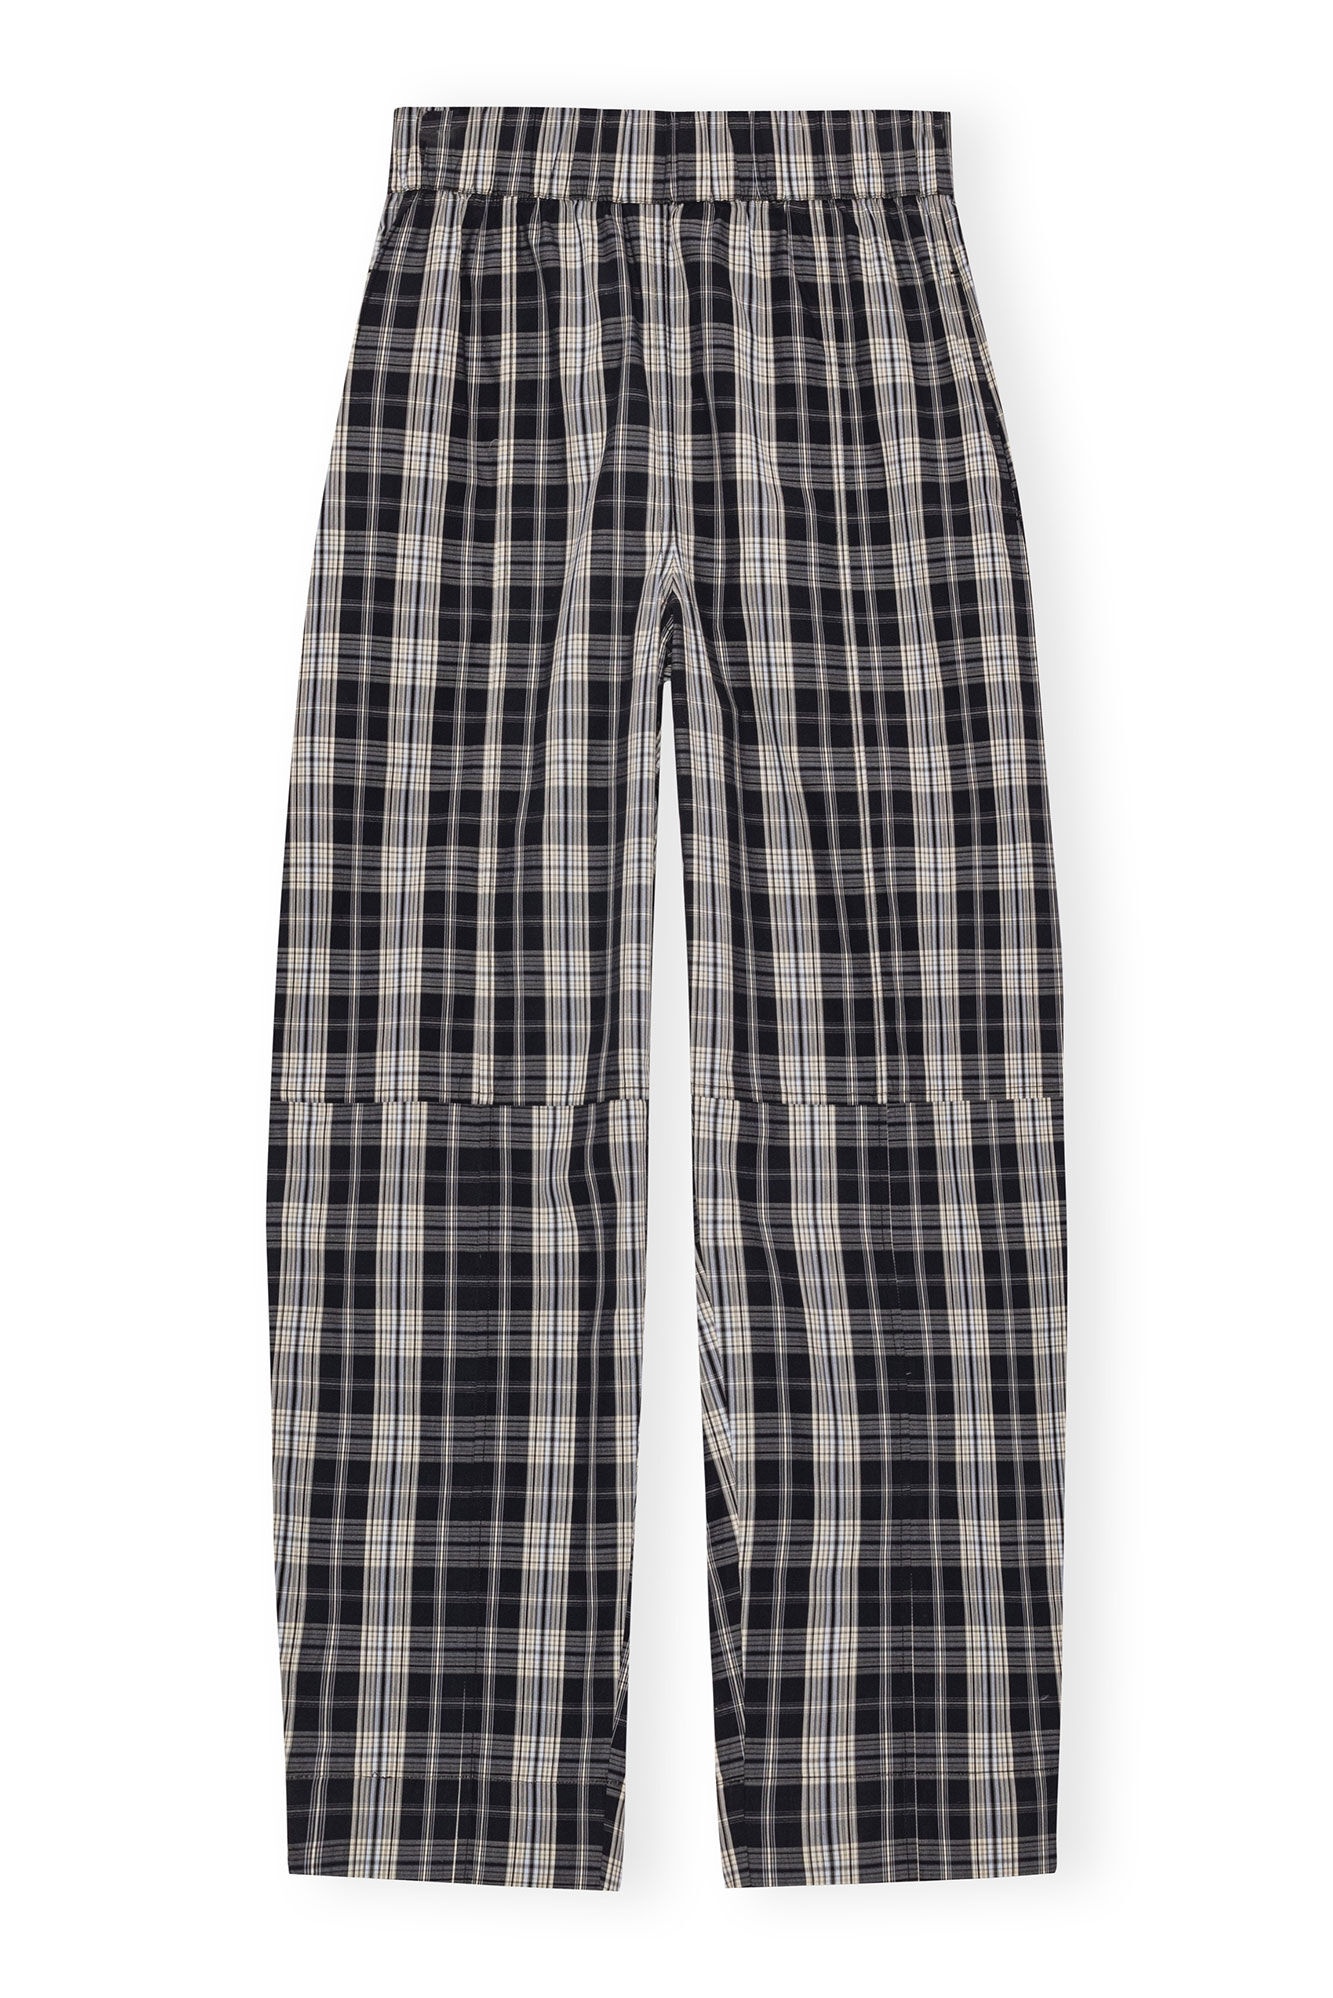 CHECKERED COTTON ELASTICATED CURVE PANTS - 5